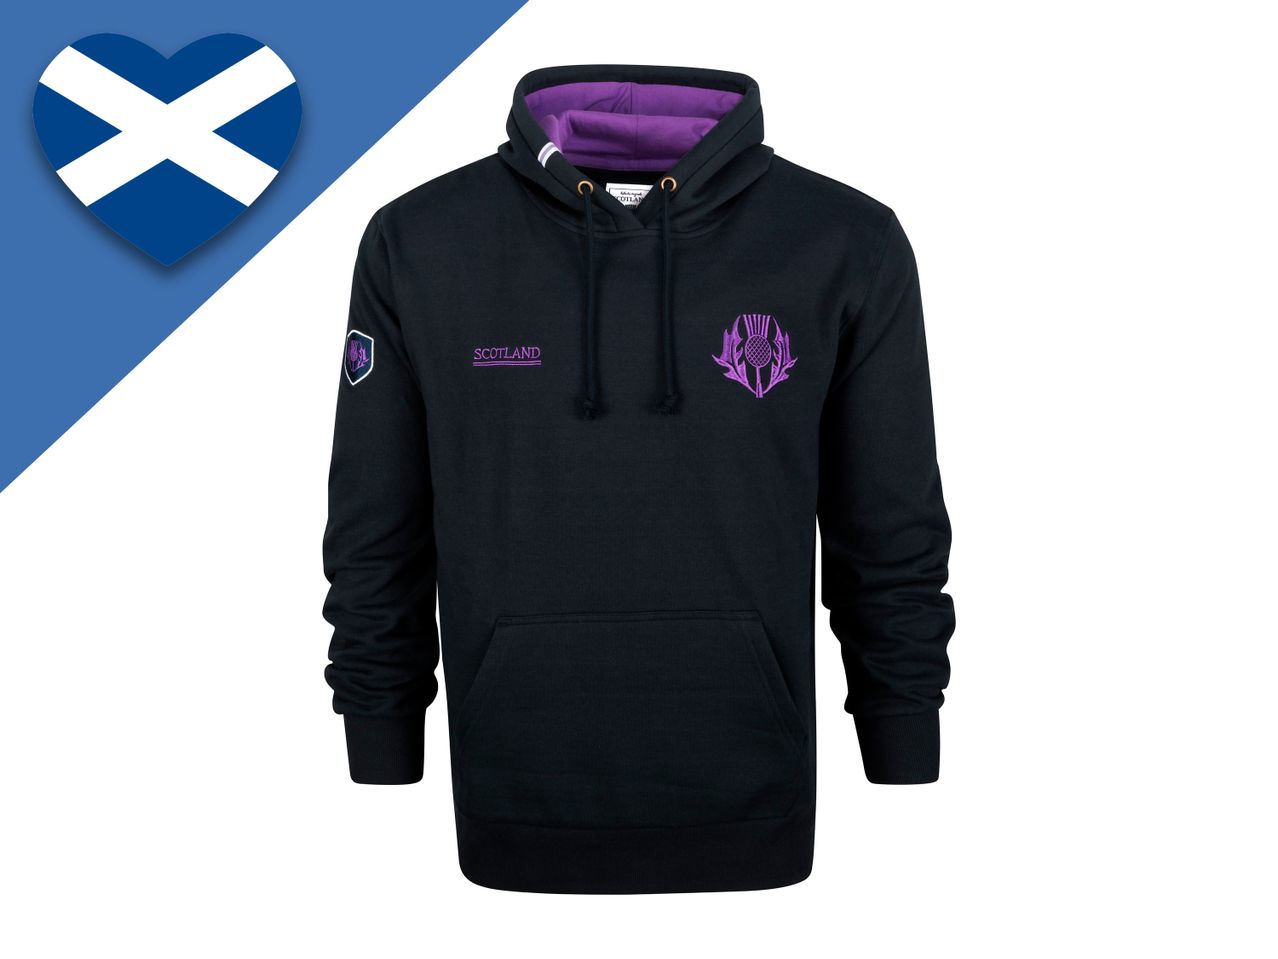 Go to full screen view: Supporter's Rugby Hoodie - Scotland - Image 1